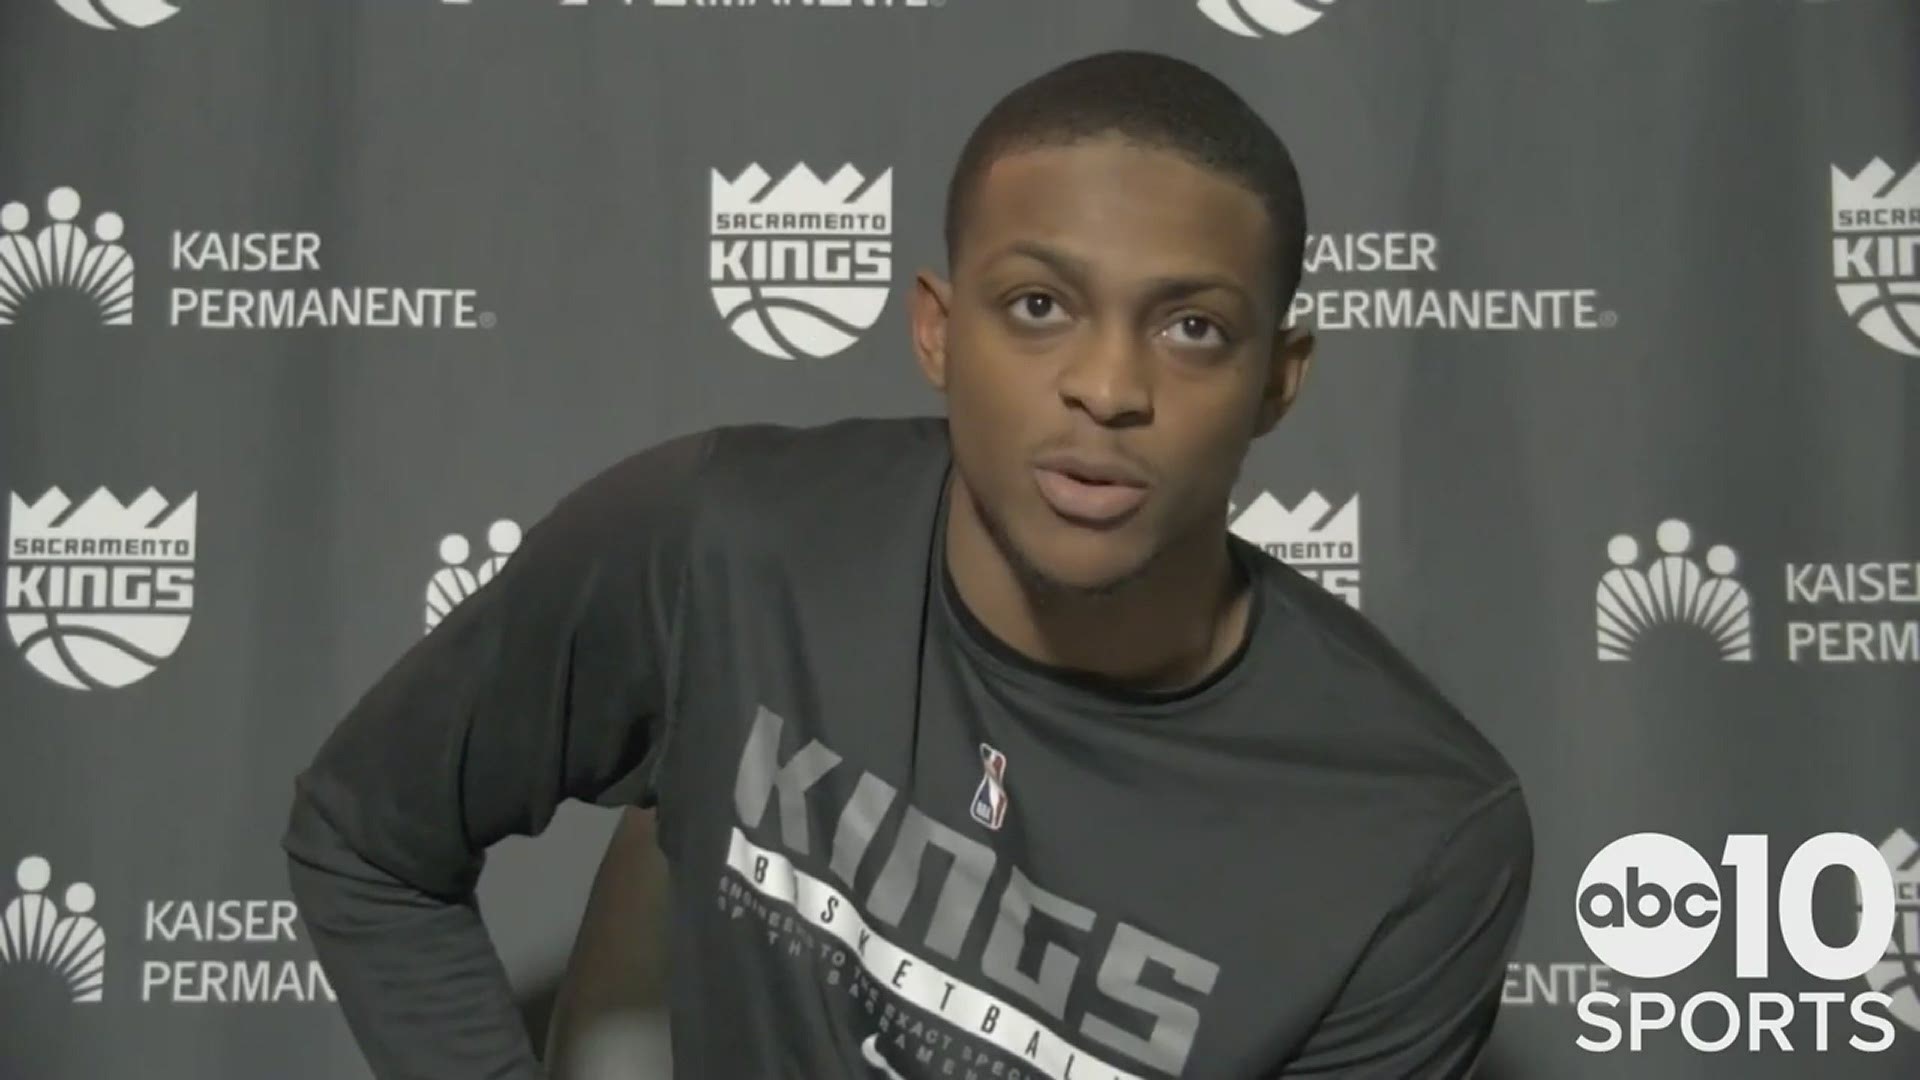 Sacramento Kings PG De'Aaron Fox talks about a thrilling 100-98 victory over the Cleveland Cavaliers on Saturday night & the game-winning shot from Harrison Barnes.